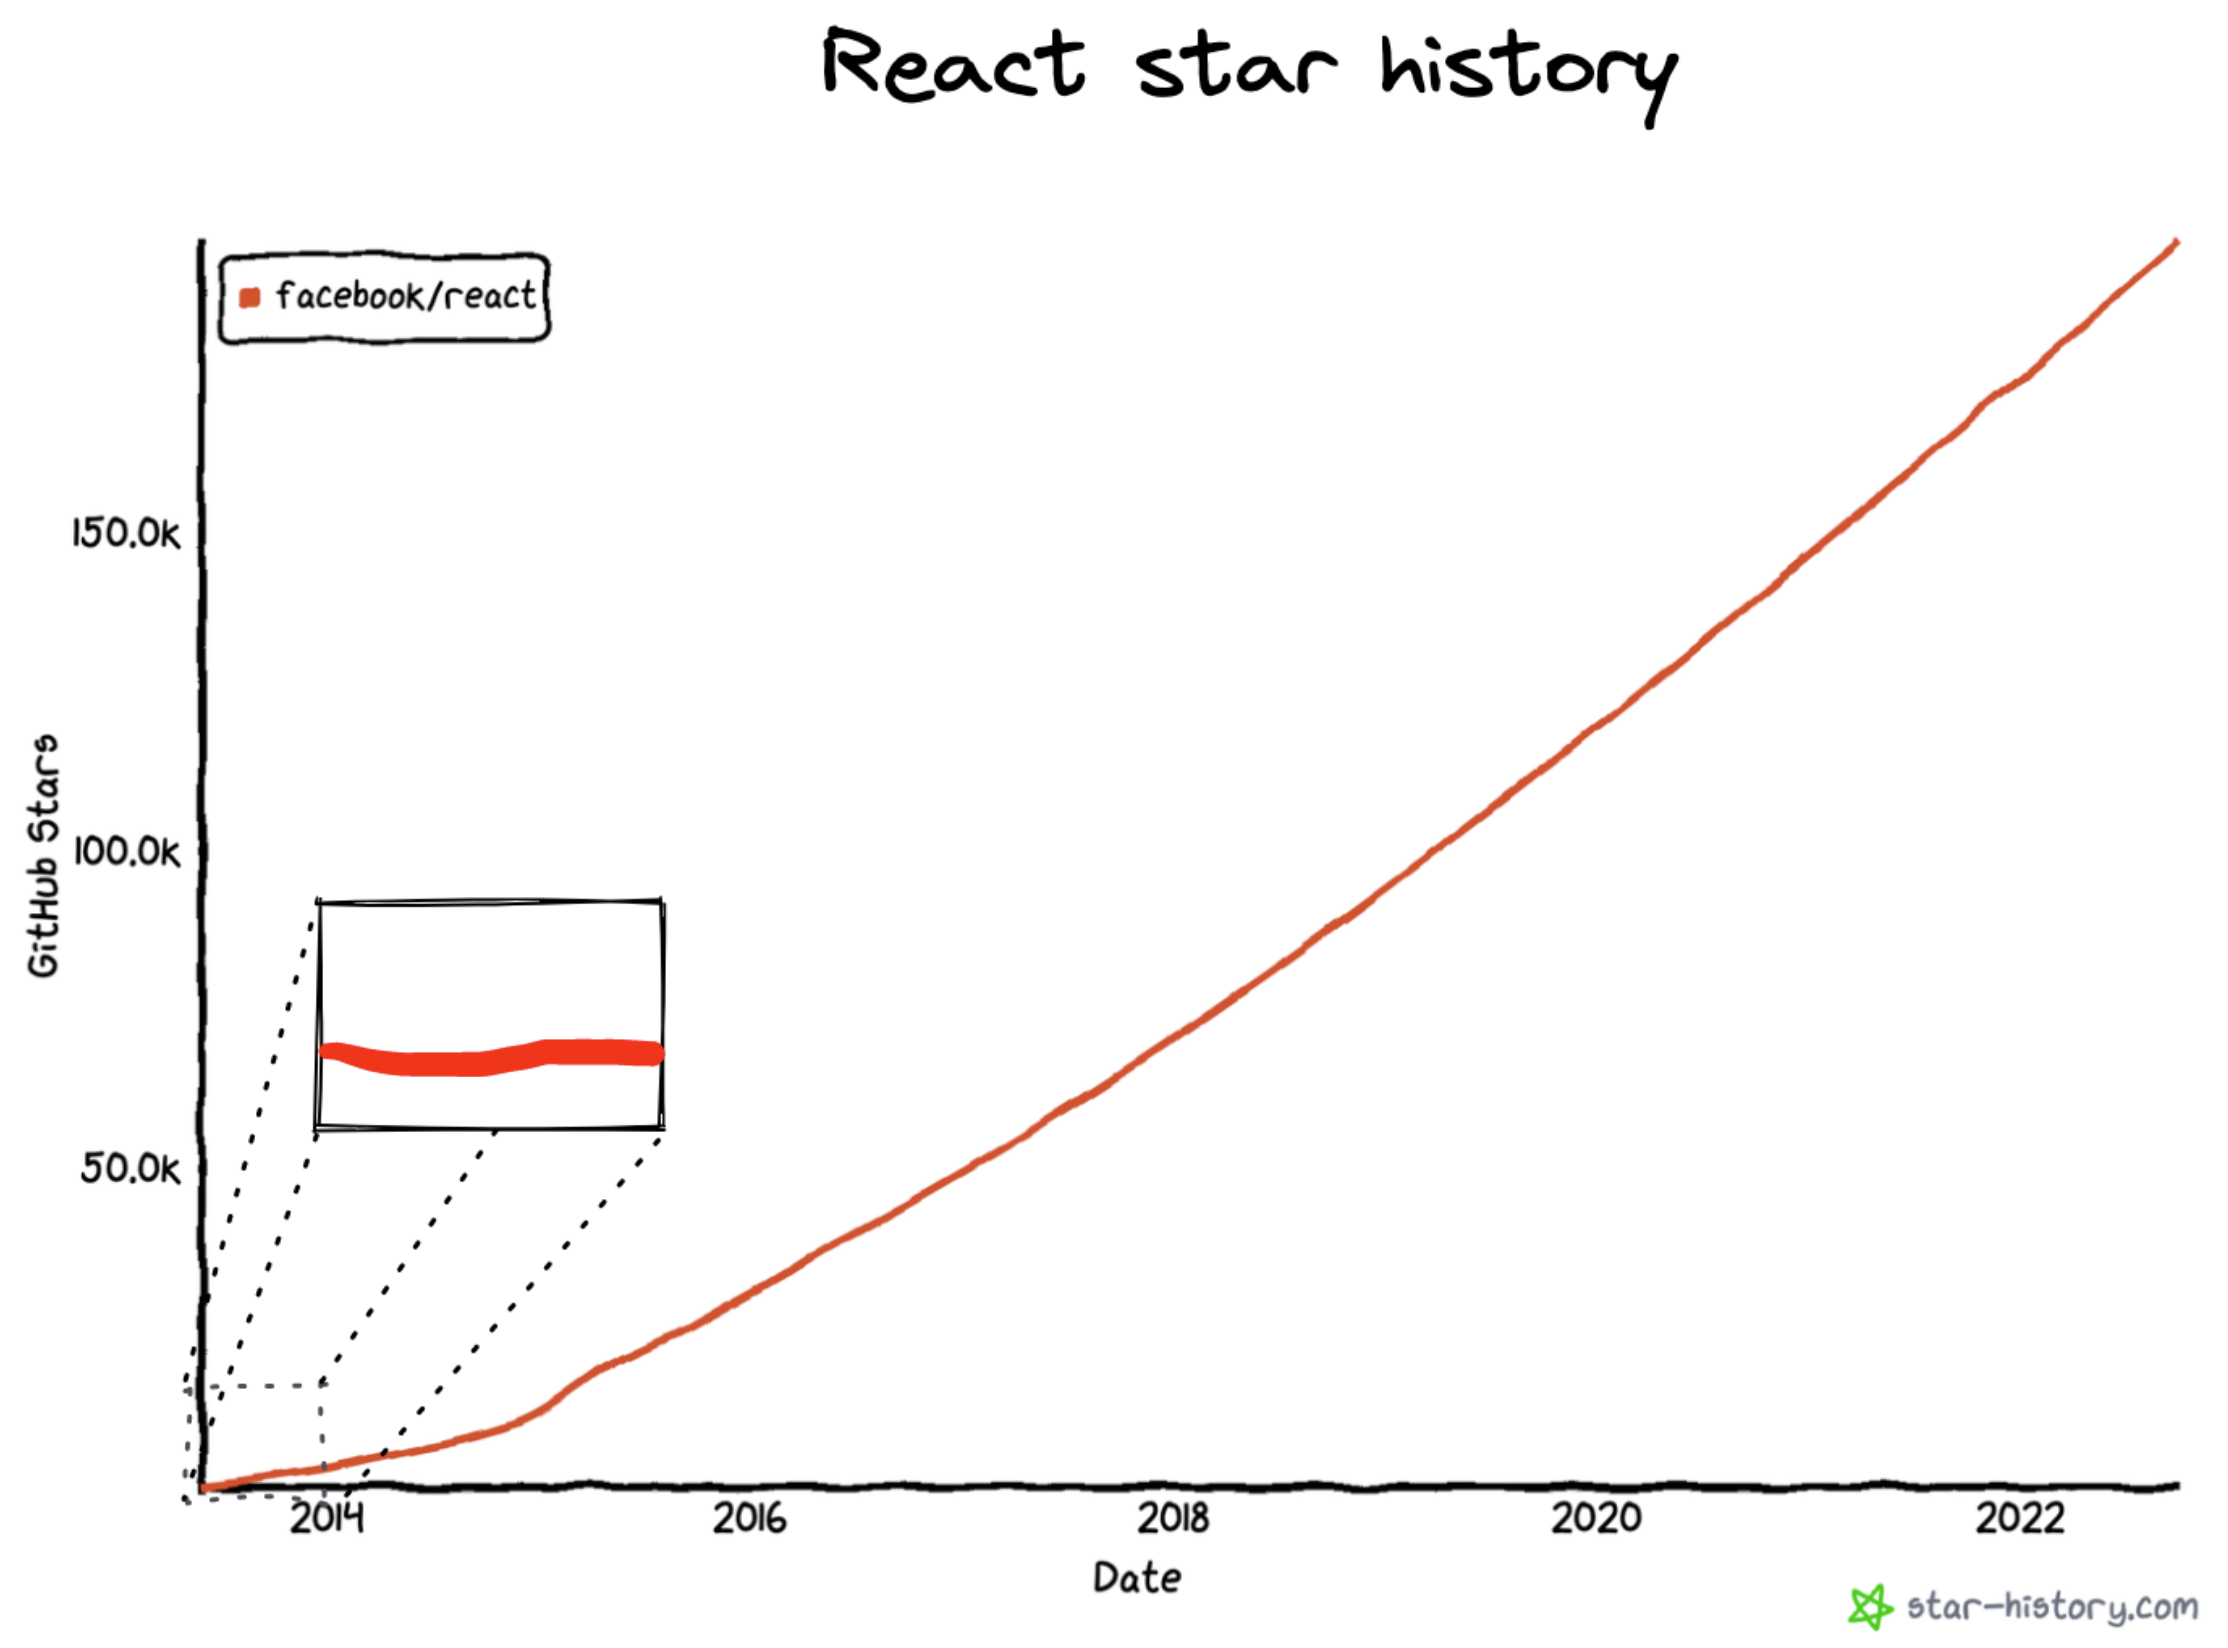 Zoomed out, React’s success is meteoric. But React’s star history in the beginning was flat, with little adoption.